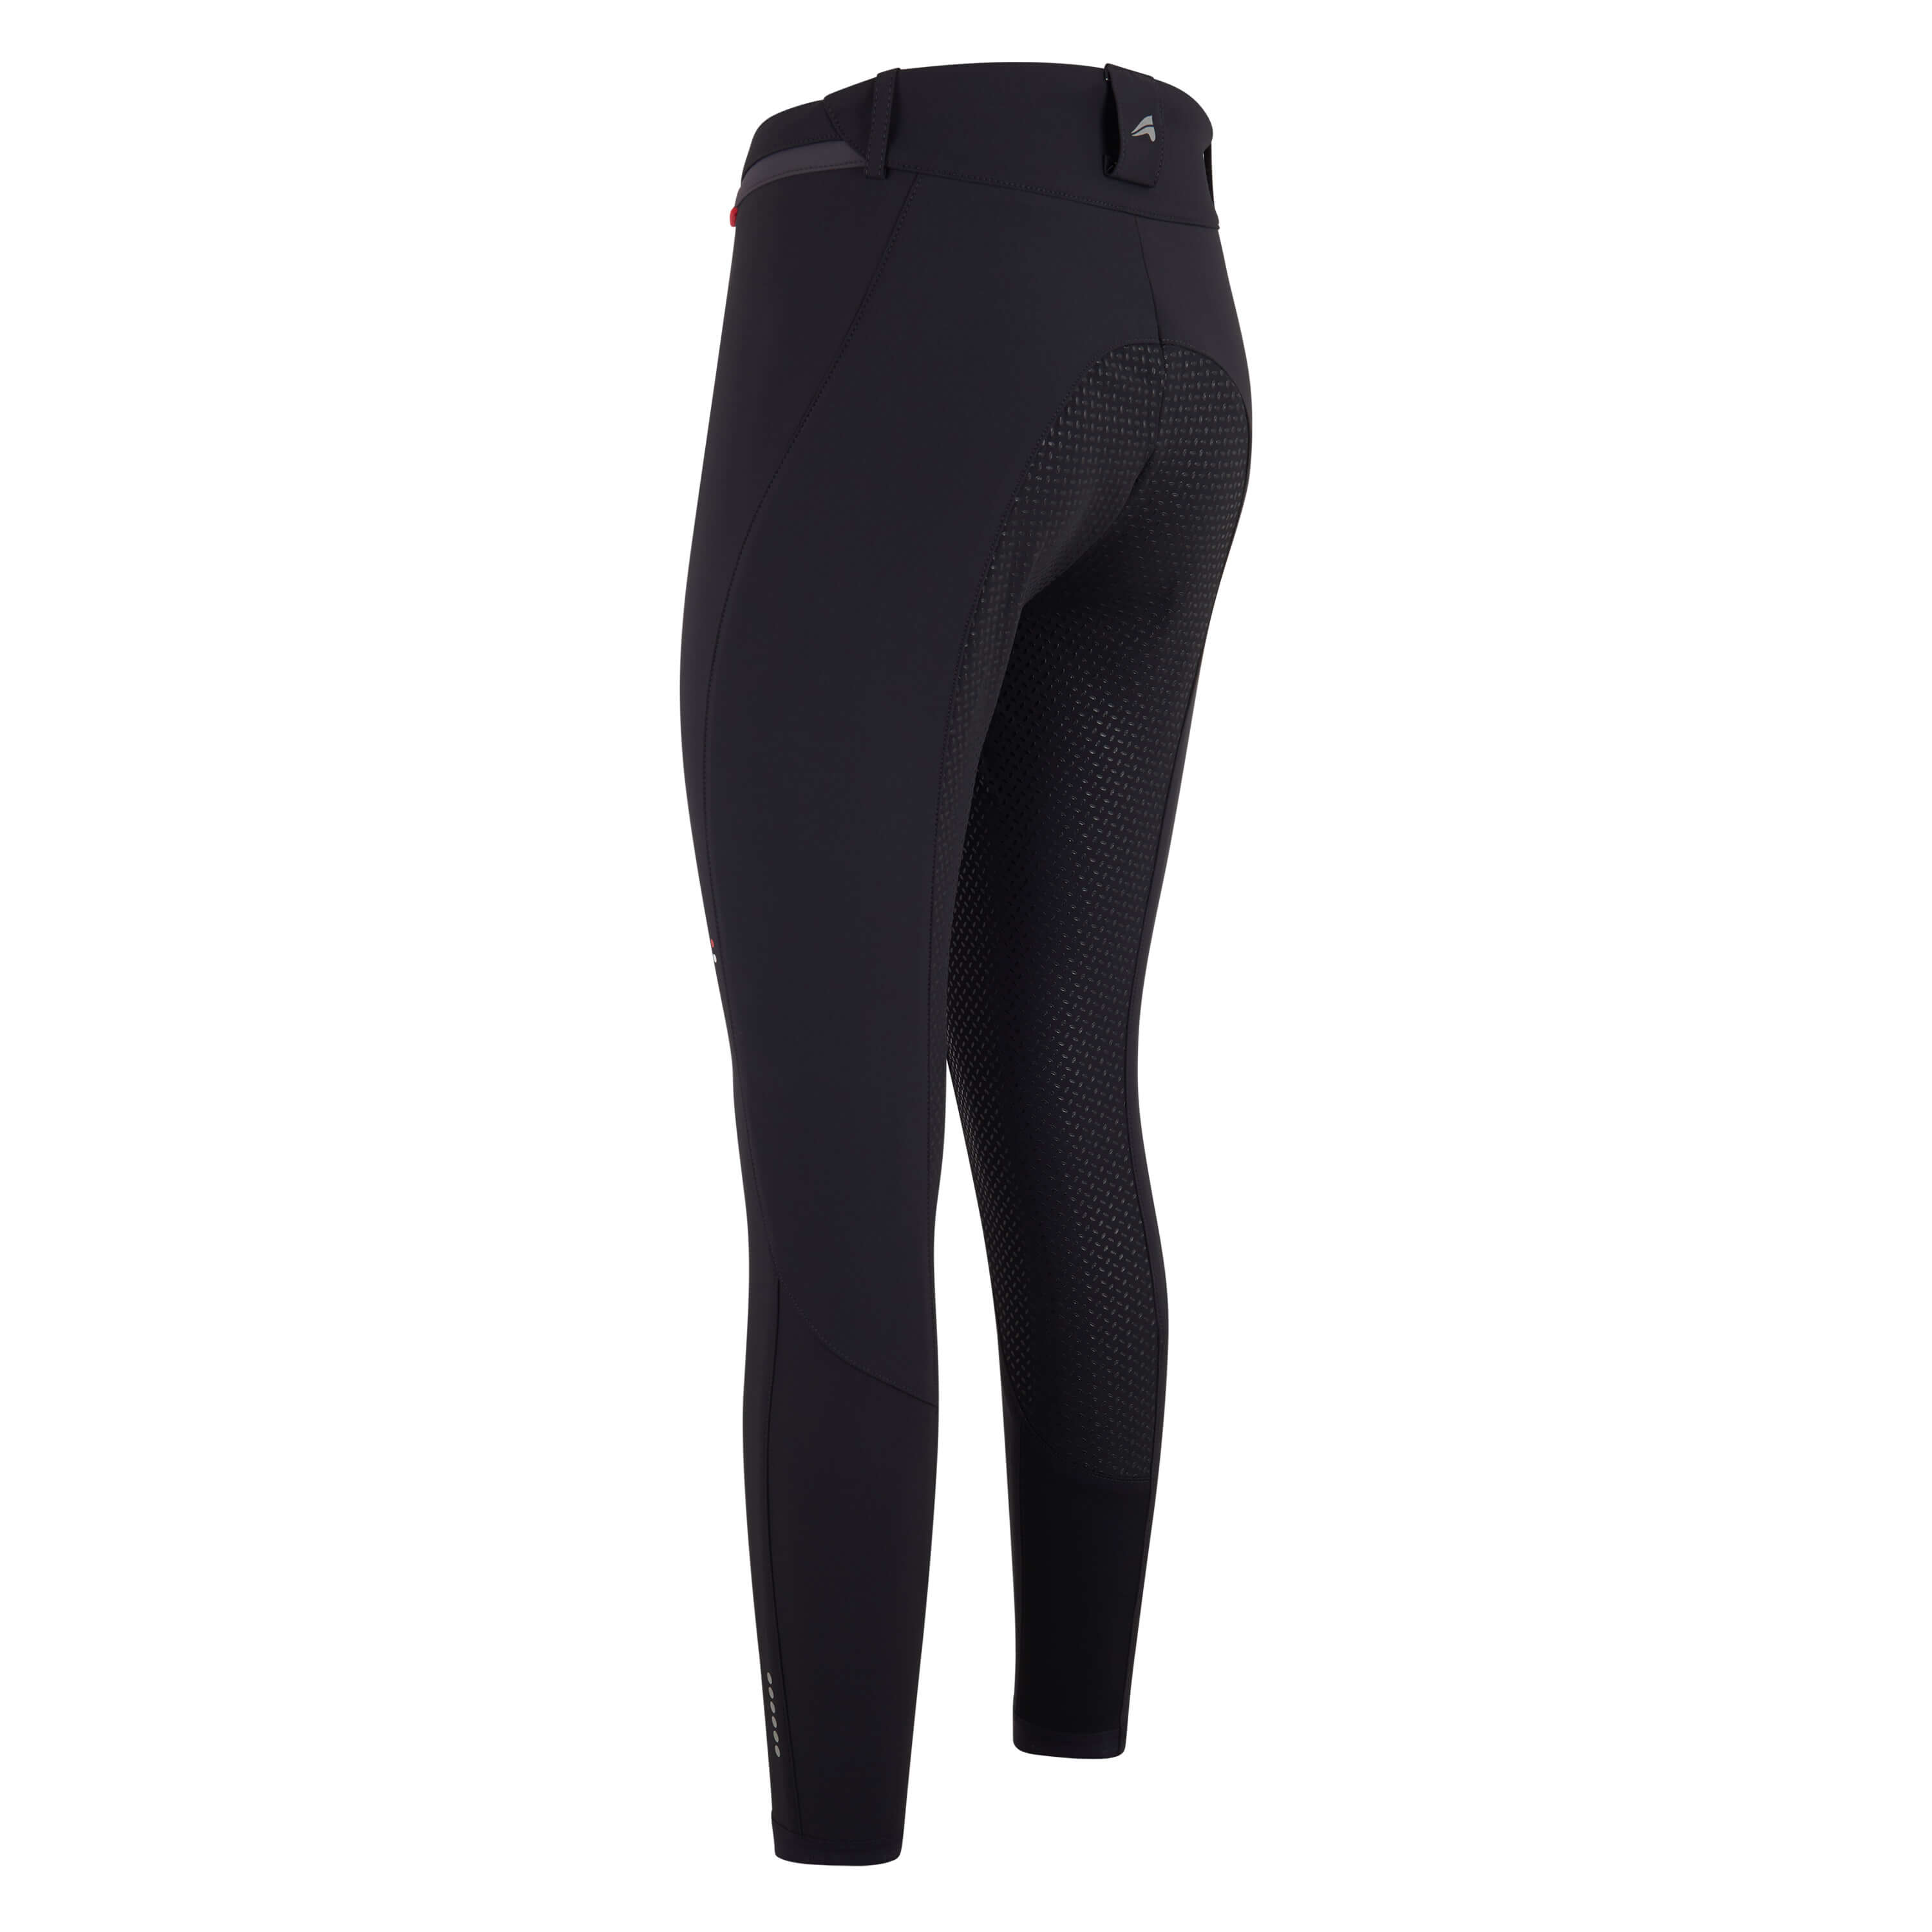 A9.02 Gallop Equestrian riding tights - African Horse Fly Spray